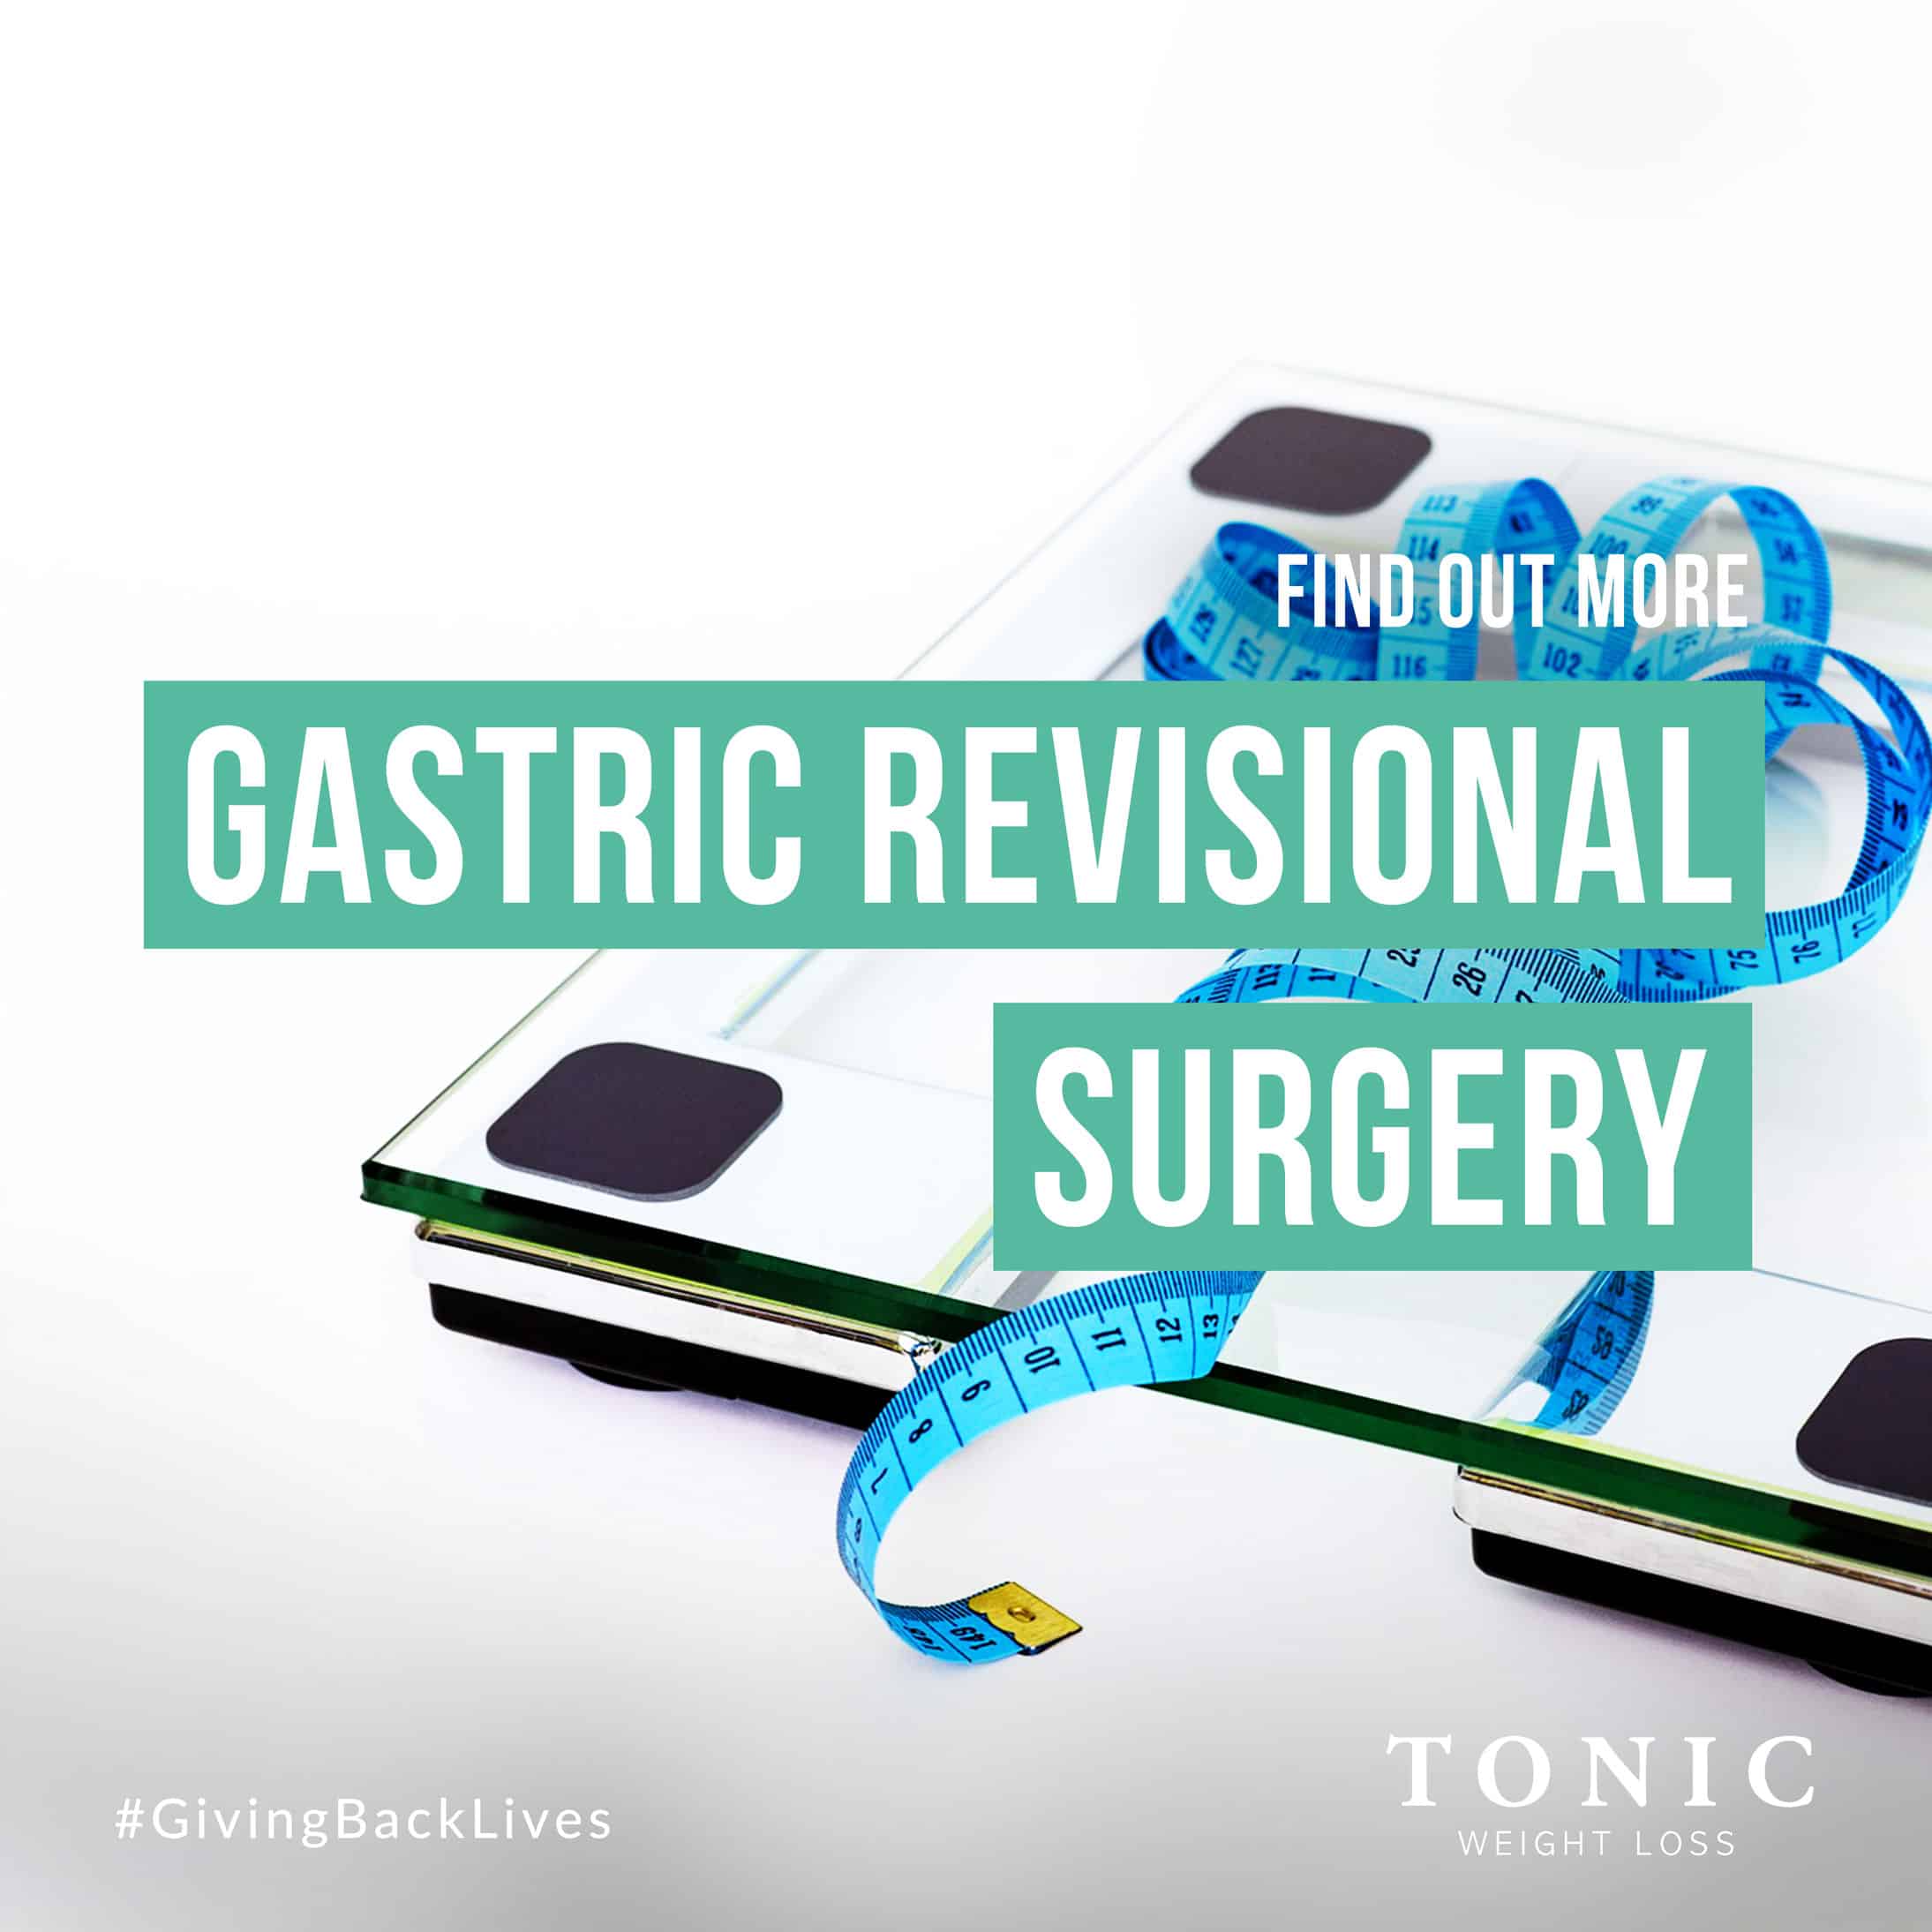 Tonic-Weight-Loss-Gastric-Revisional-Surgery-Find-Out-More